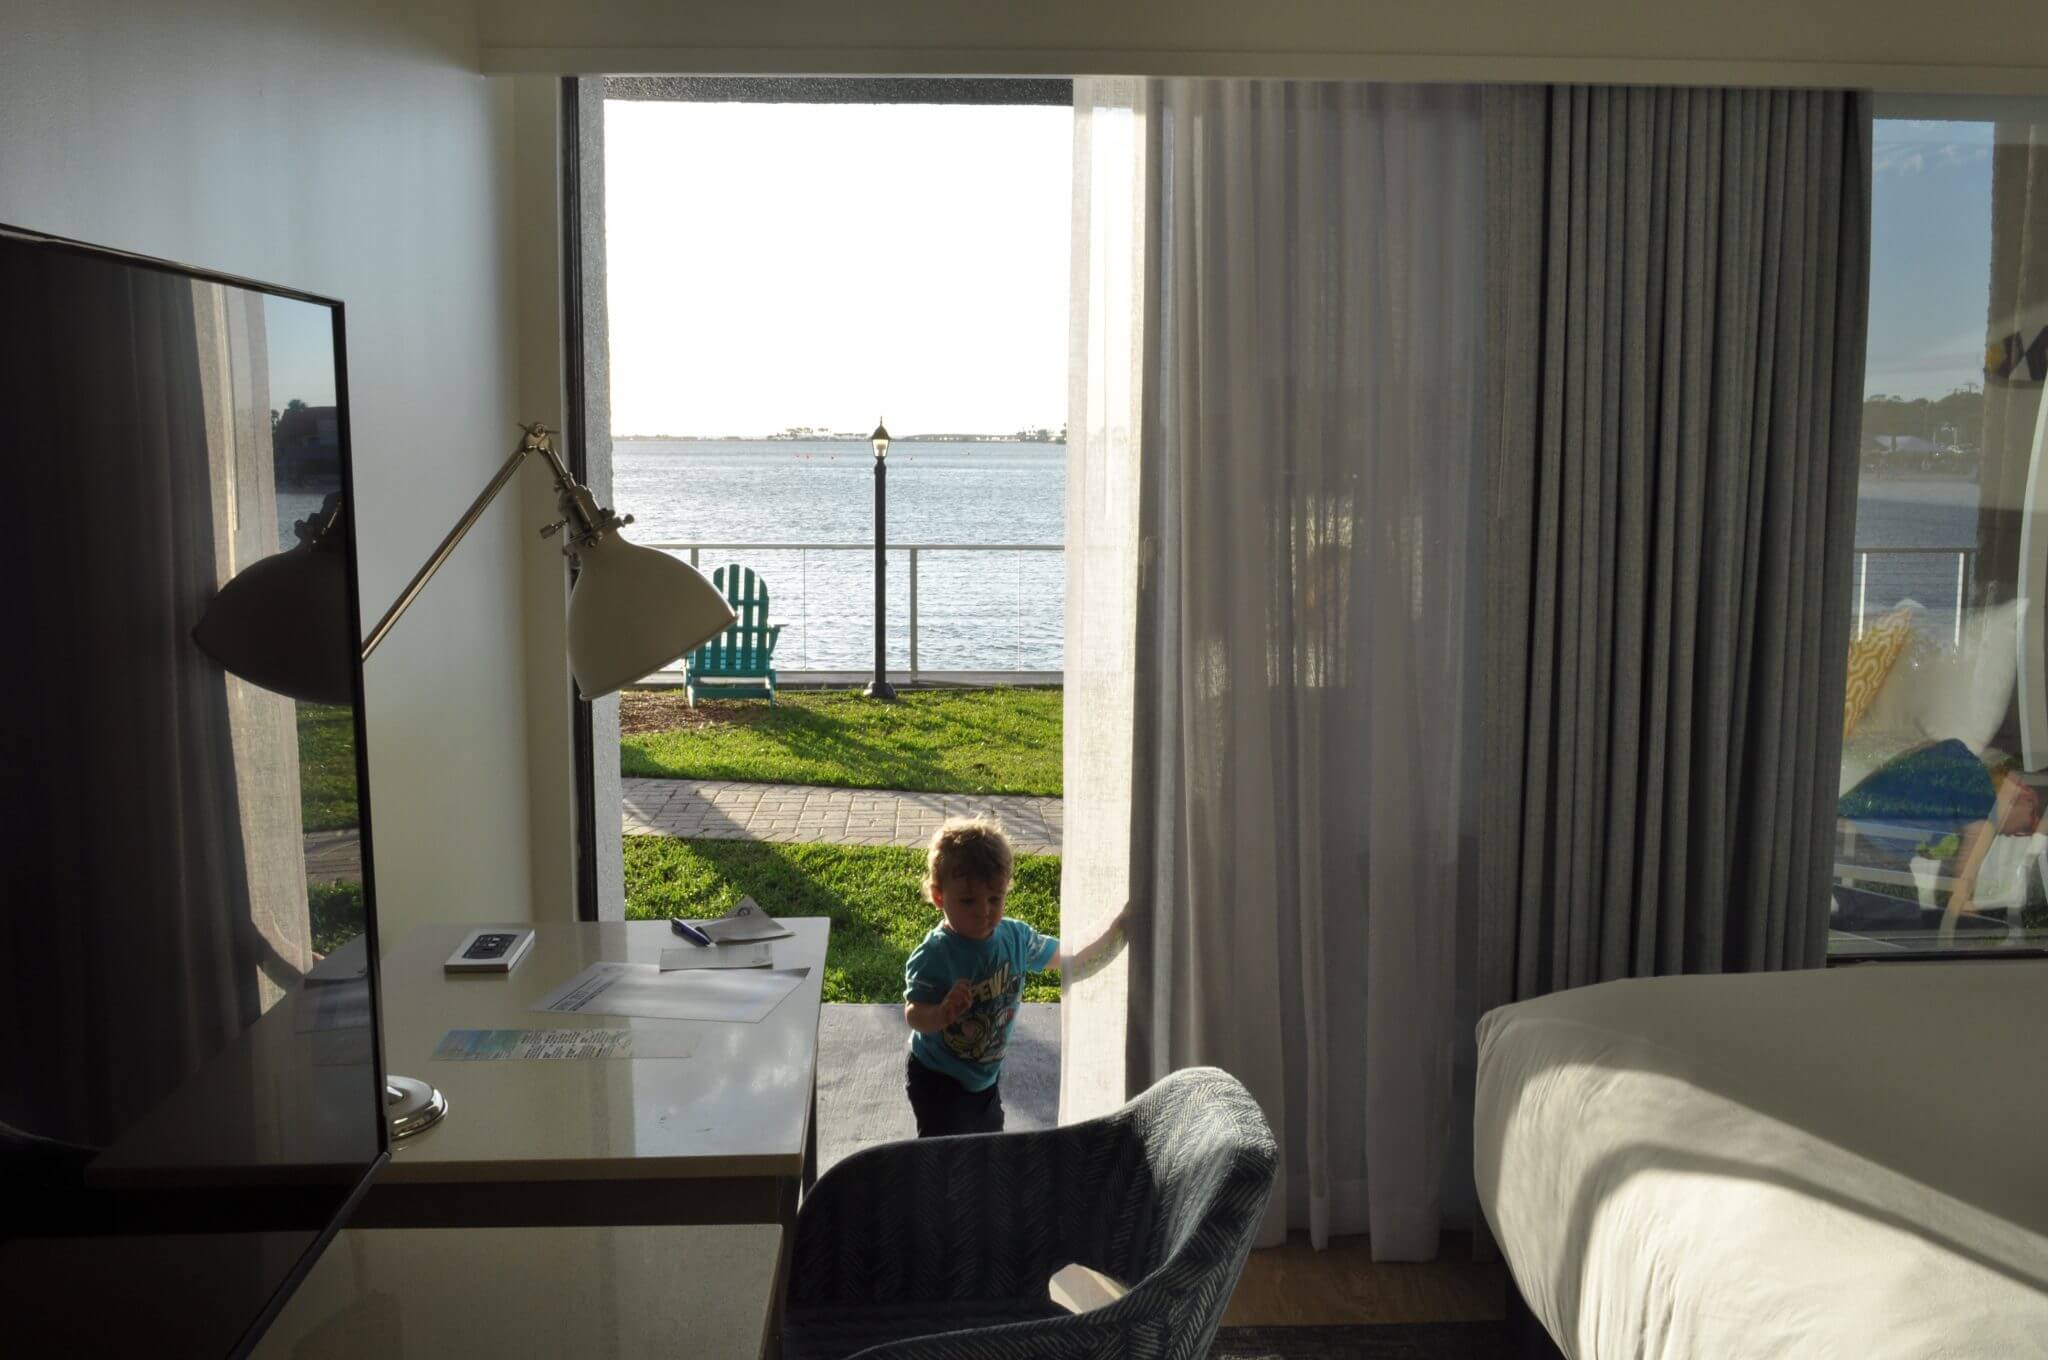 What to do in Tampa with Kids? Stay at the Bay Harbor Hotel for a great views of Tampa Bay. www.huntingforrubies.com